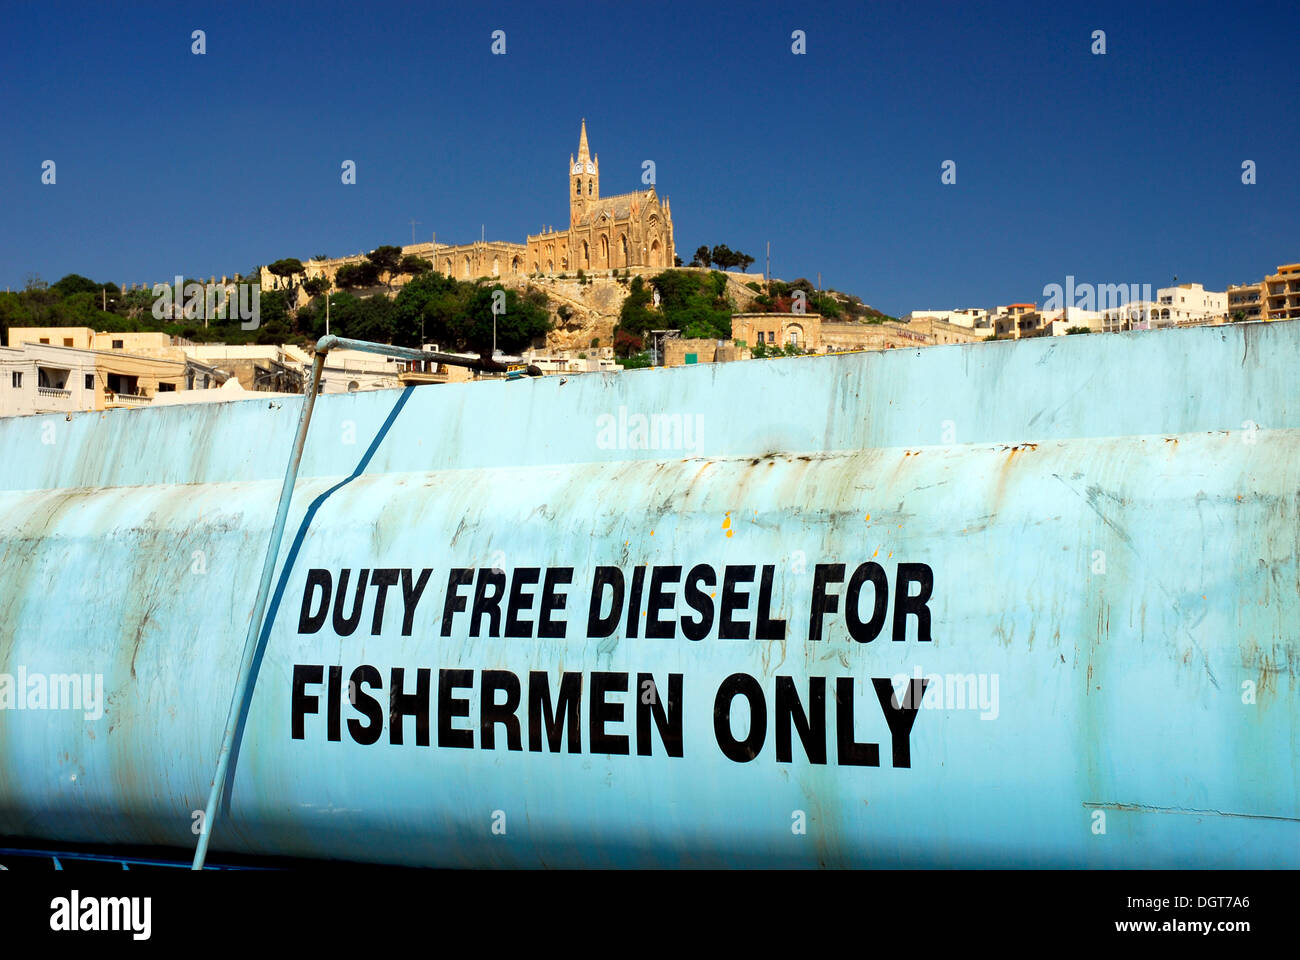 Blue tank containing diesel fuel, duty free diesel for fishermen only, Mgarr Harbour, church at back, Mgarr, Island of Gozo Stock Photo